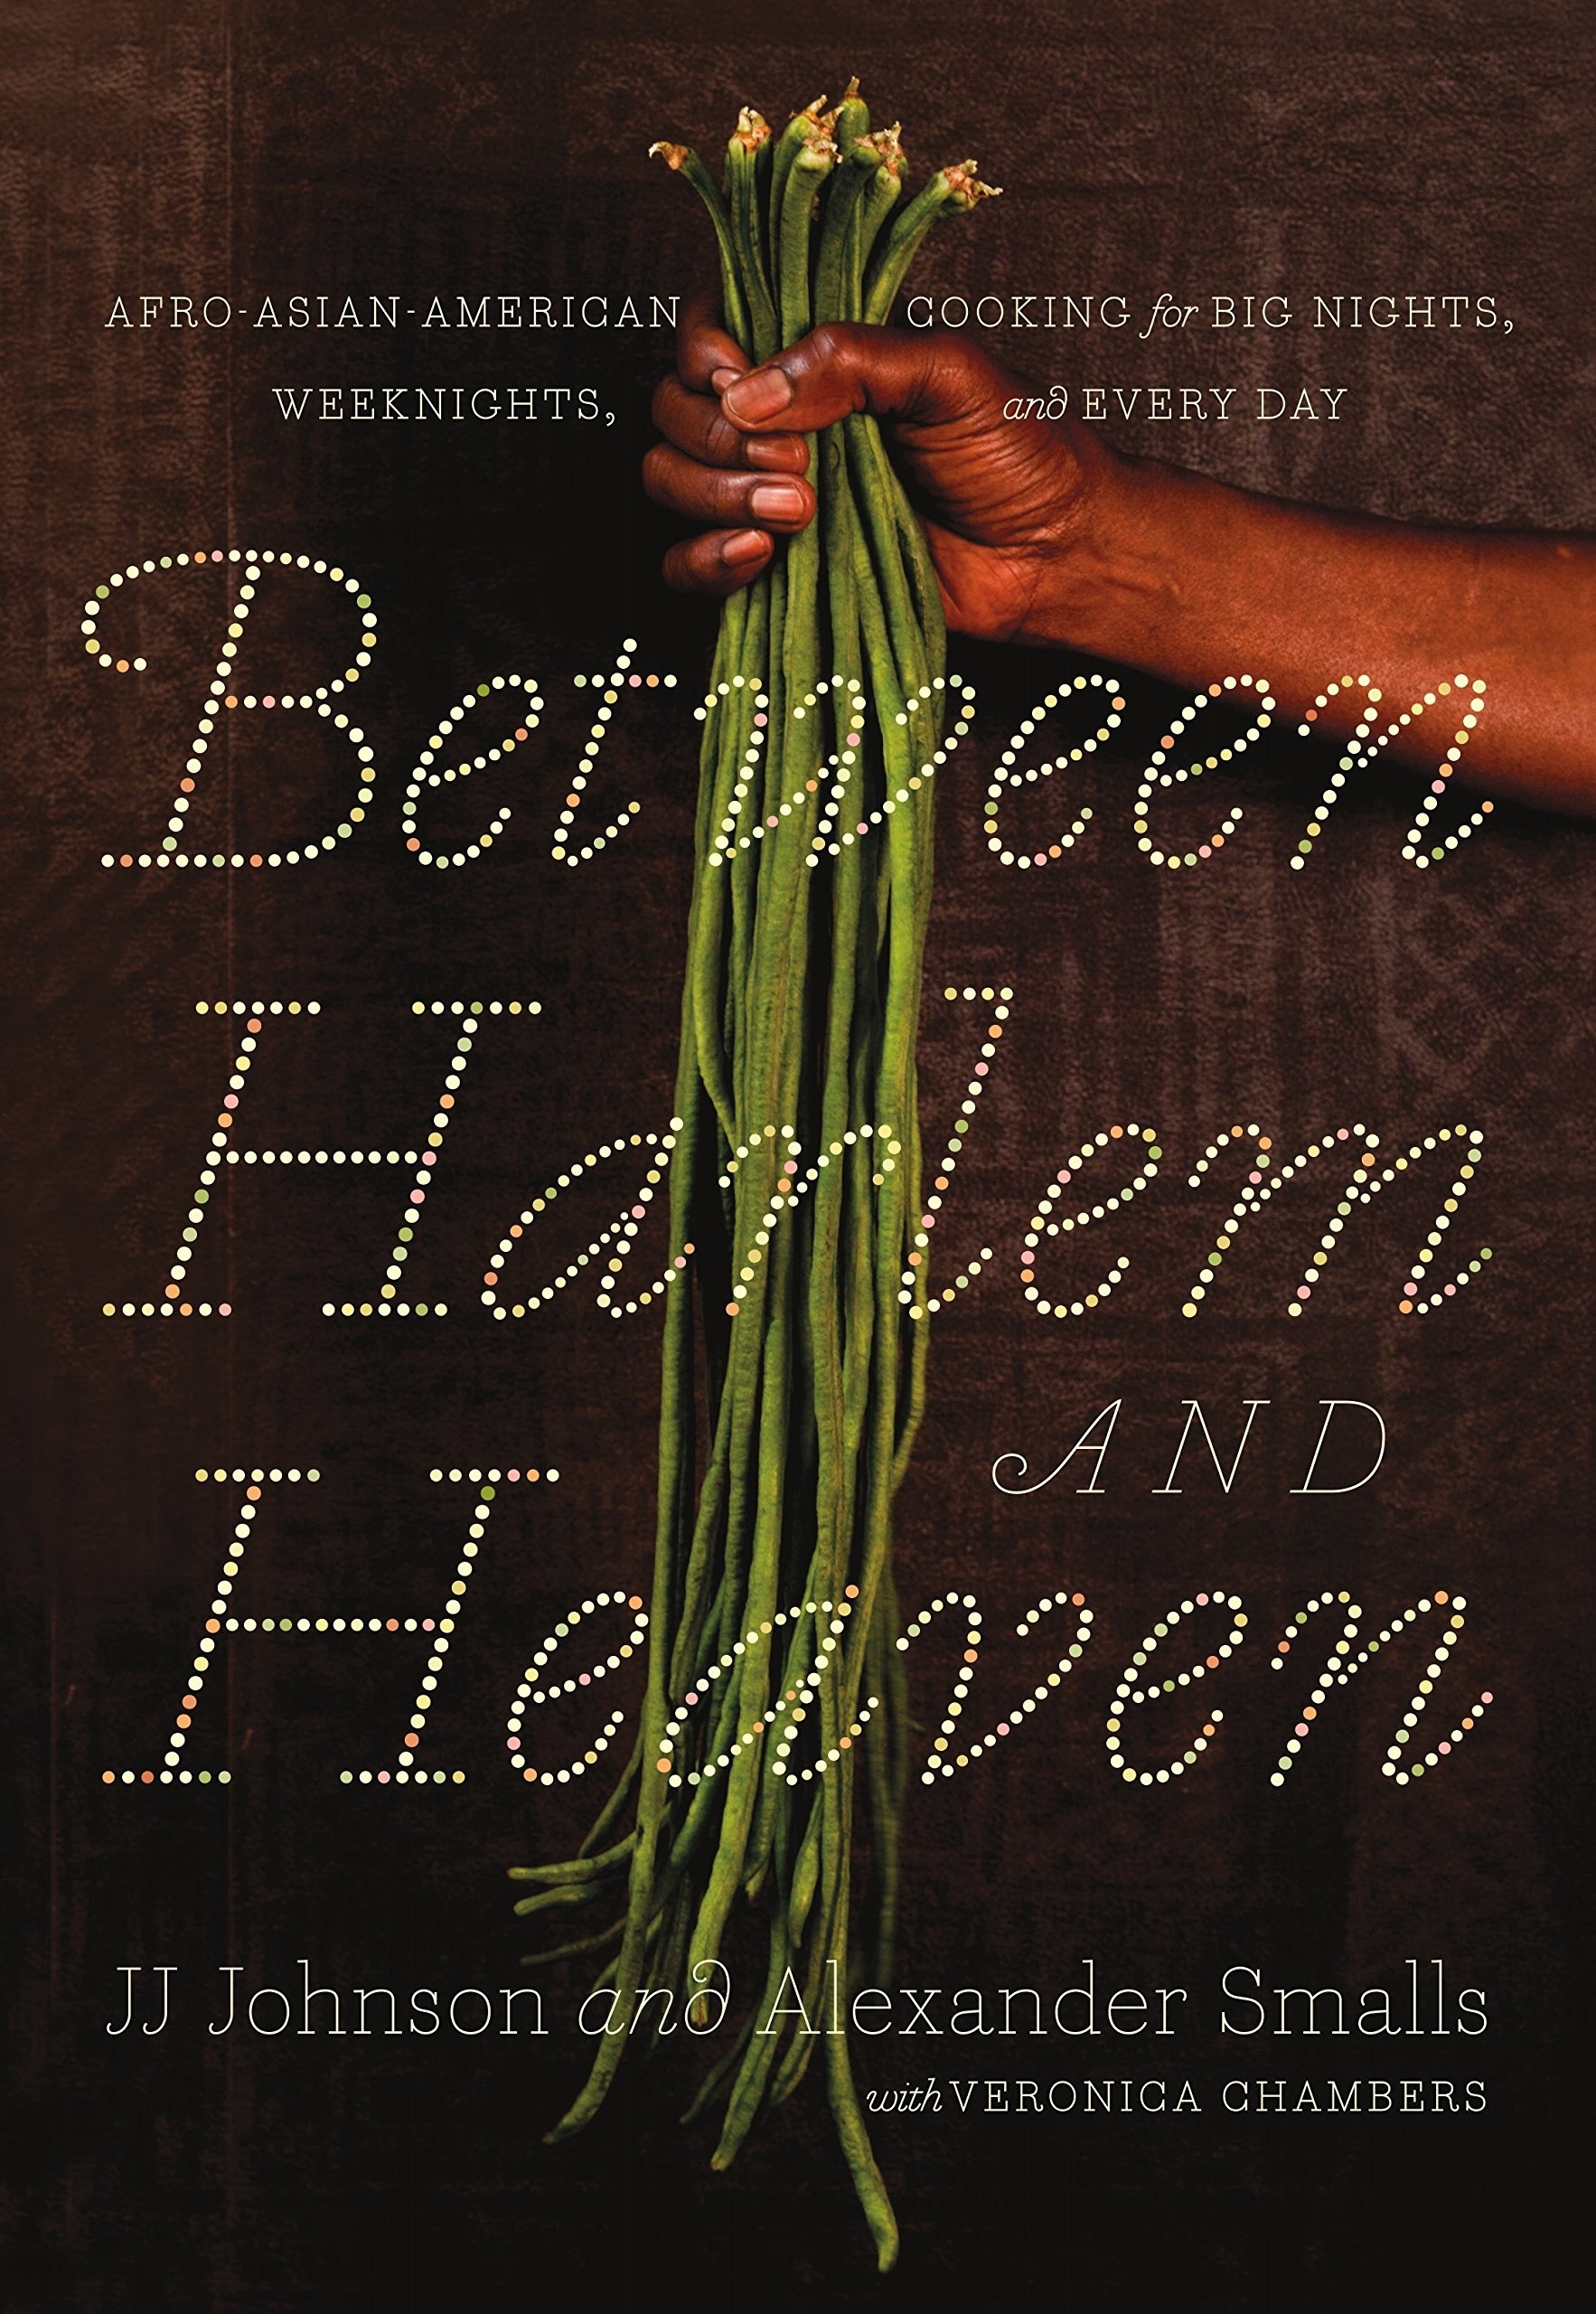 The cover of the book which shows a hand holding greens